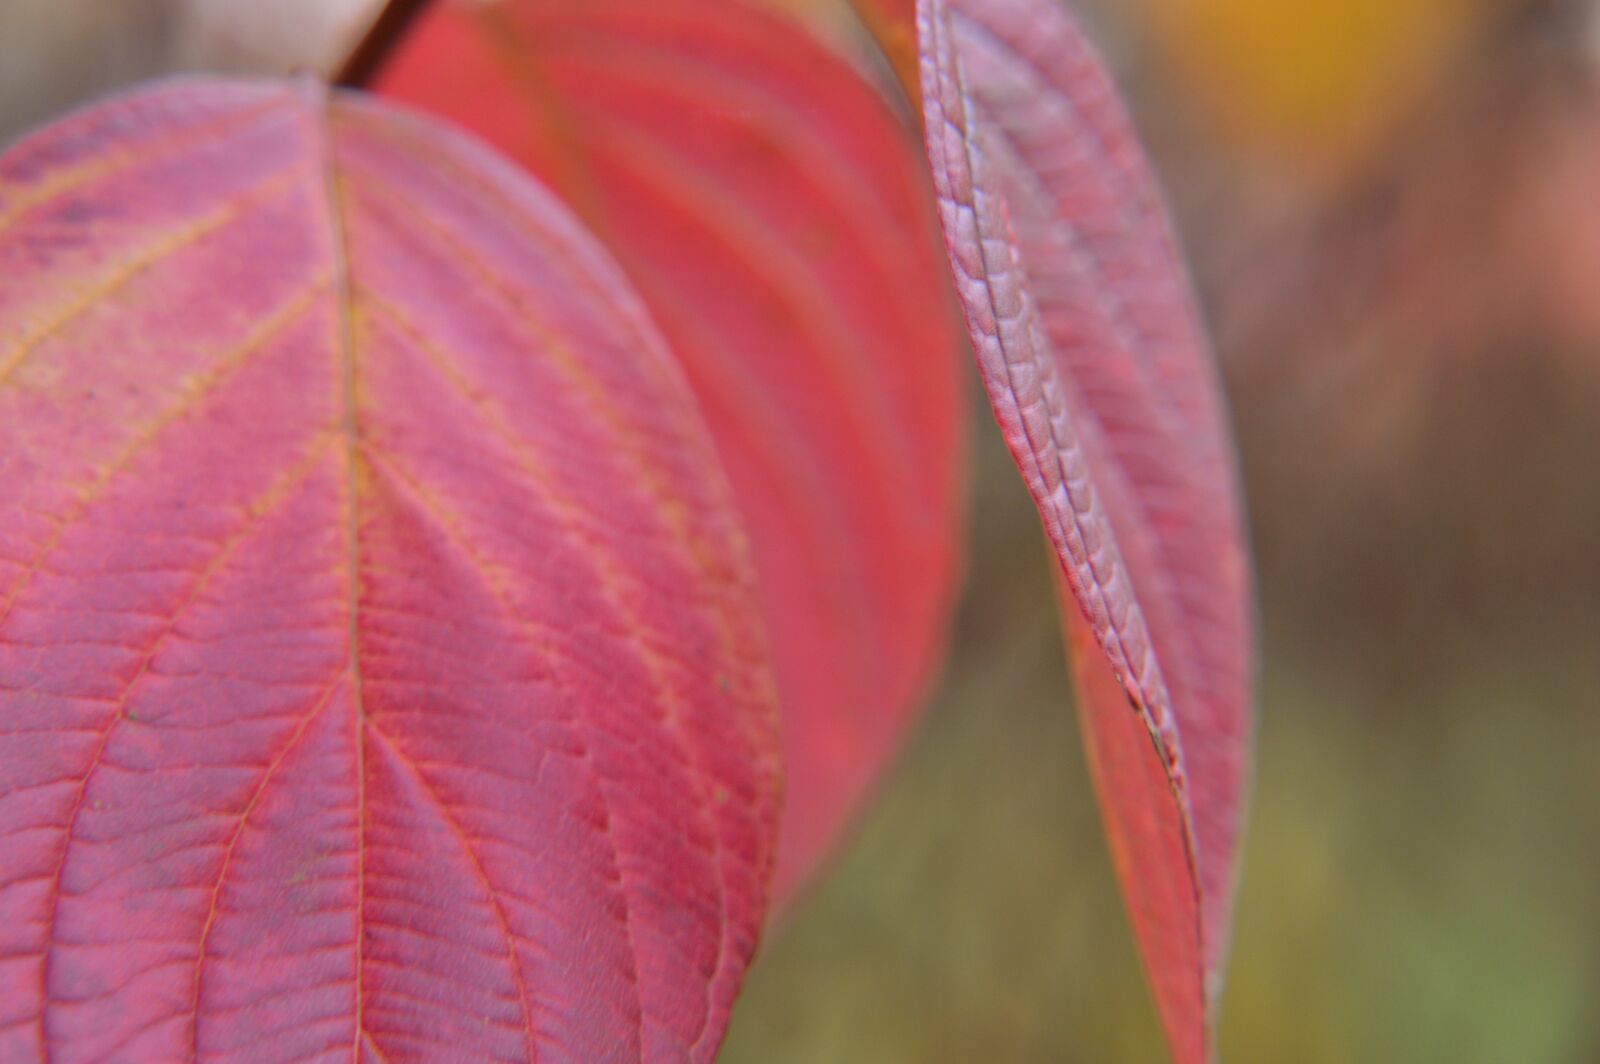 Tamron 18-270mm F3.5-6.3 Di II VC PZD sample photo. Leaves, red, nature photography